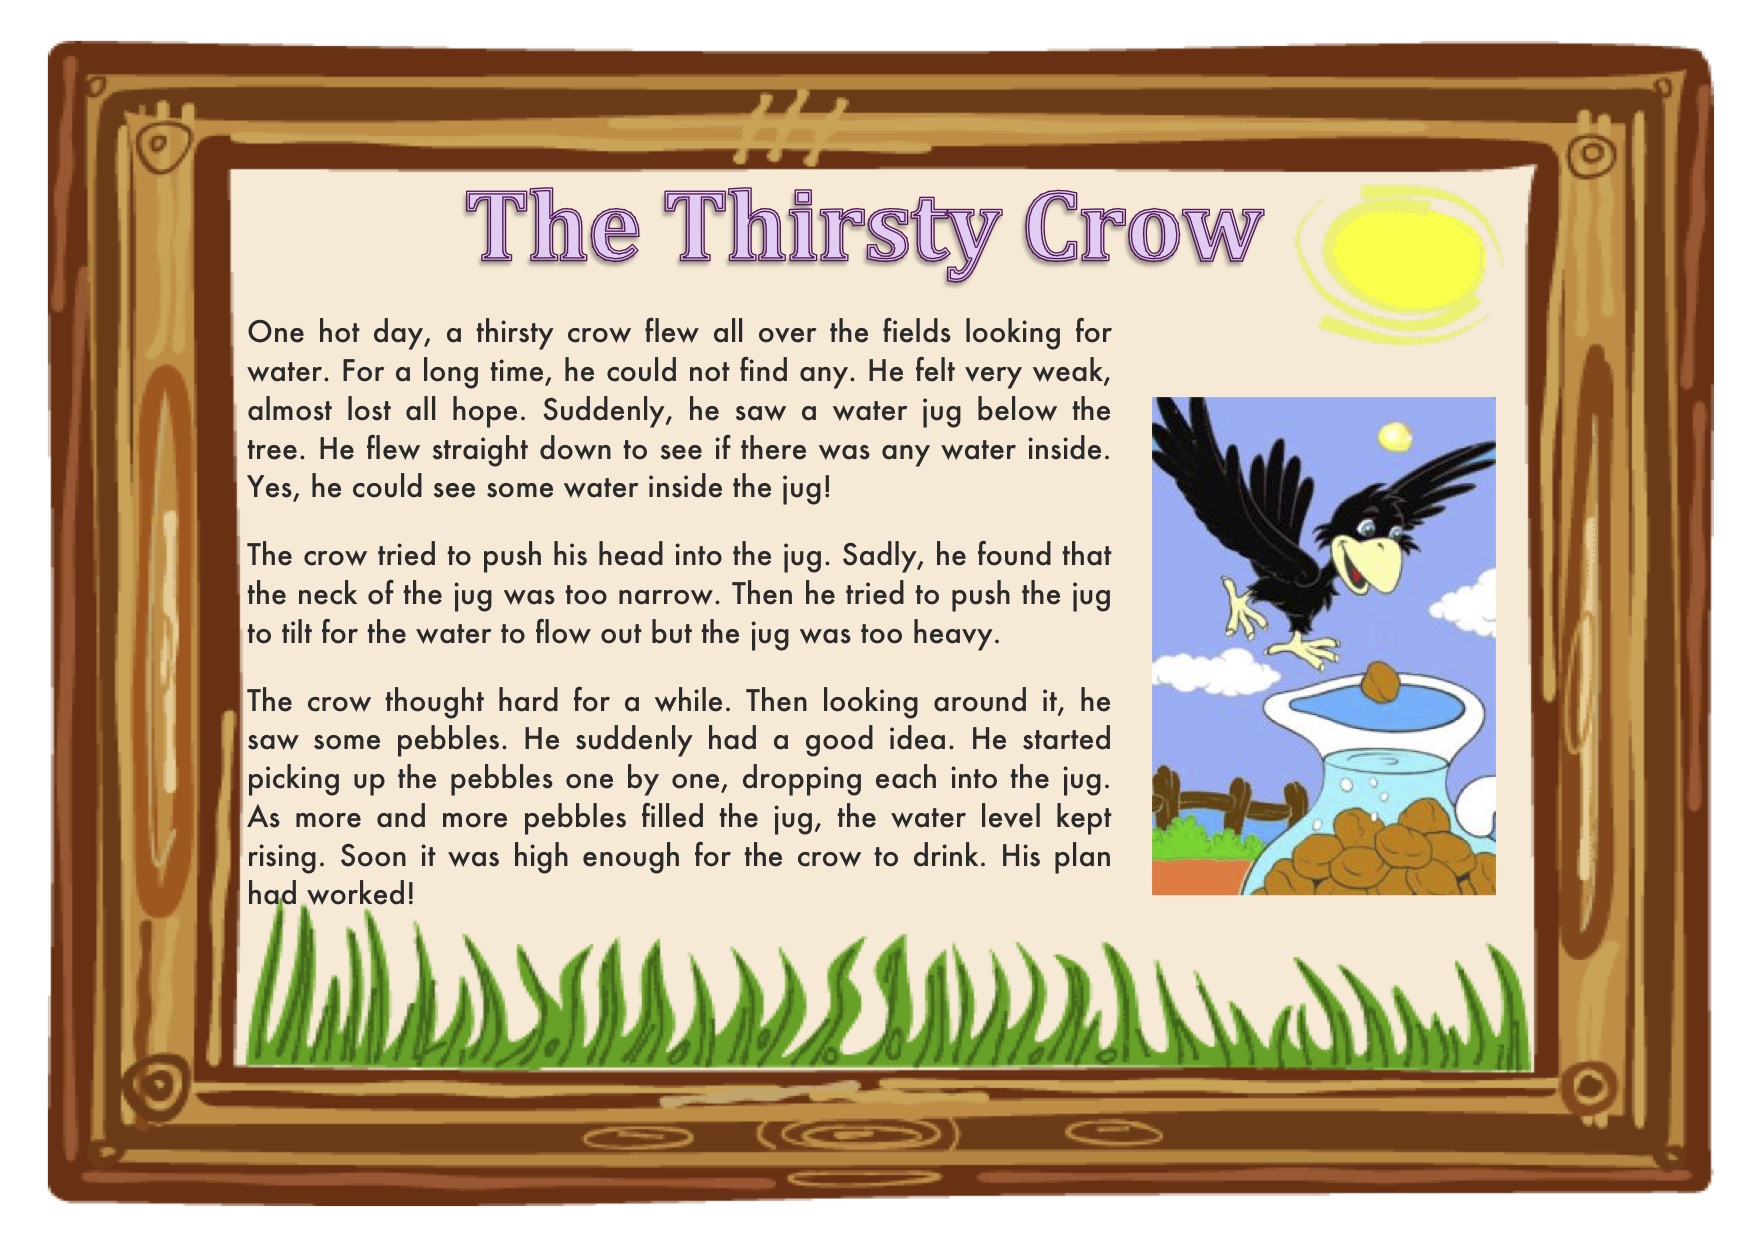 Is was very thirsty. The thirsty Crow. Crow story. The Fox and the Crow текст на английском. The story “the Fox and the Crow”..